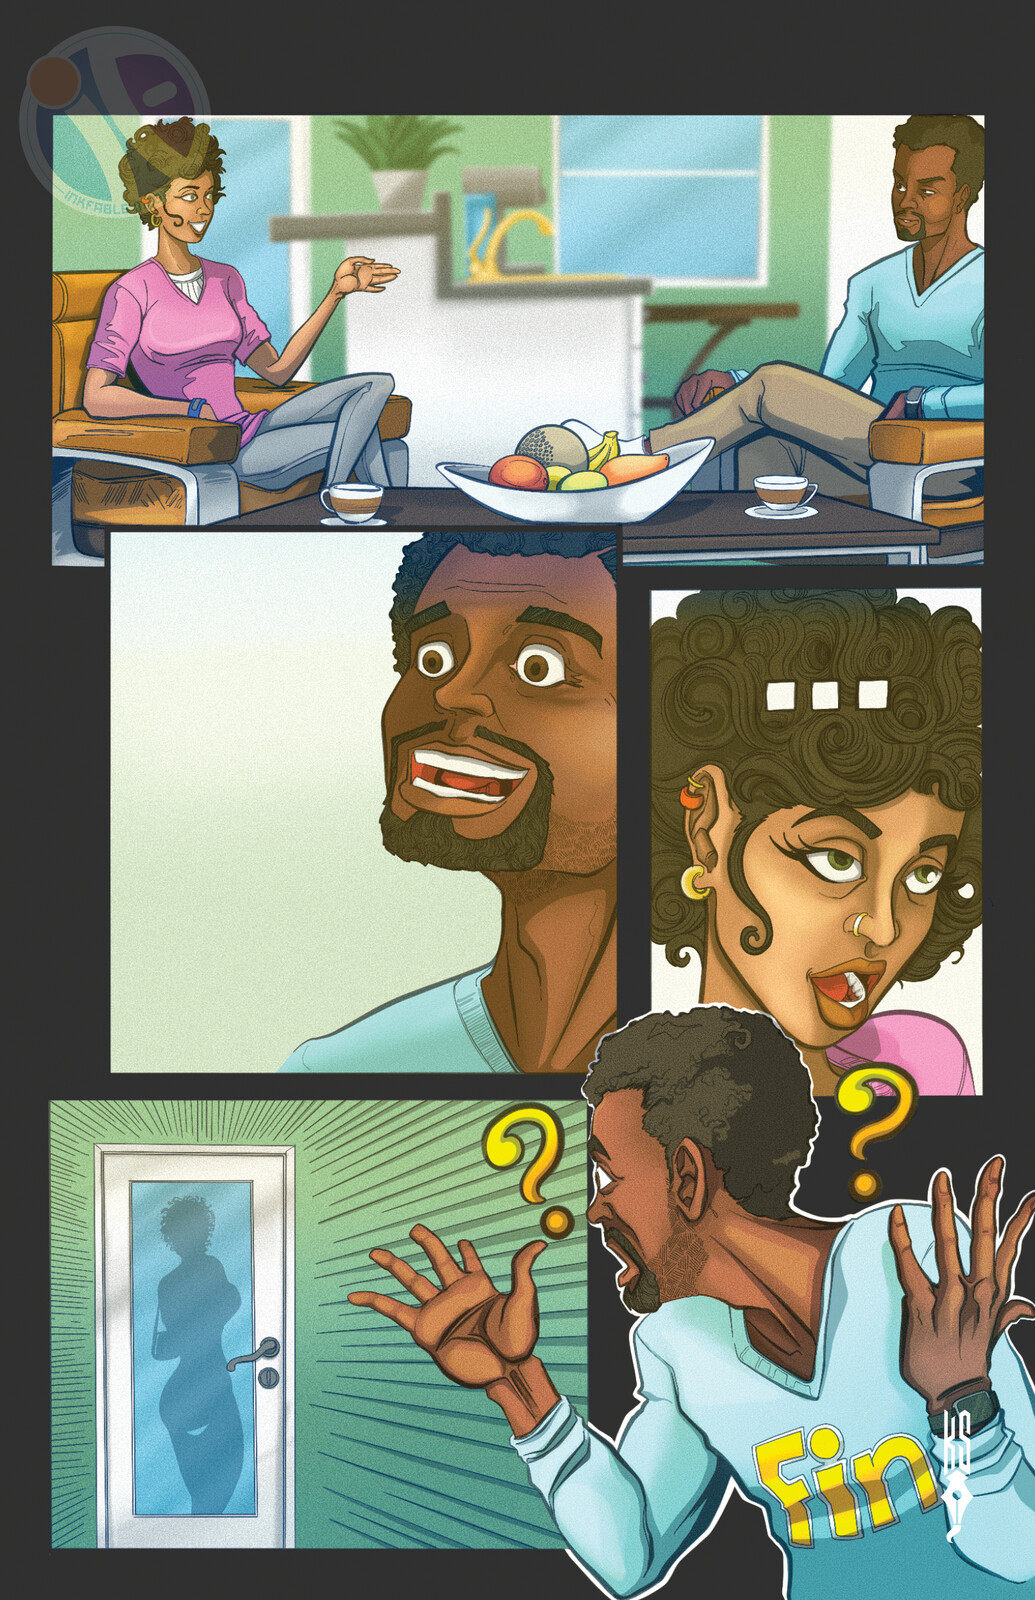 Dating While Black #04 Single Page Comic 